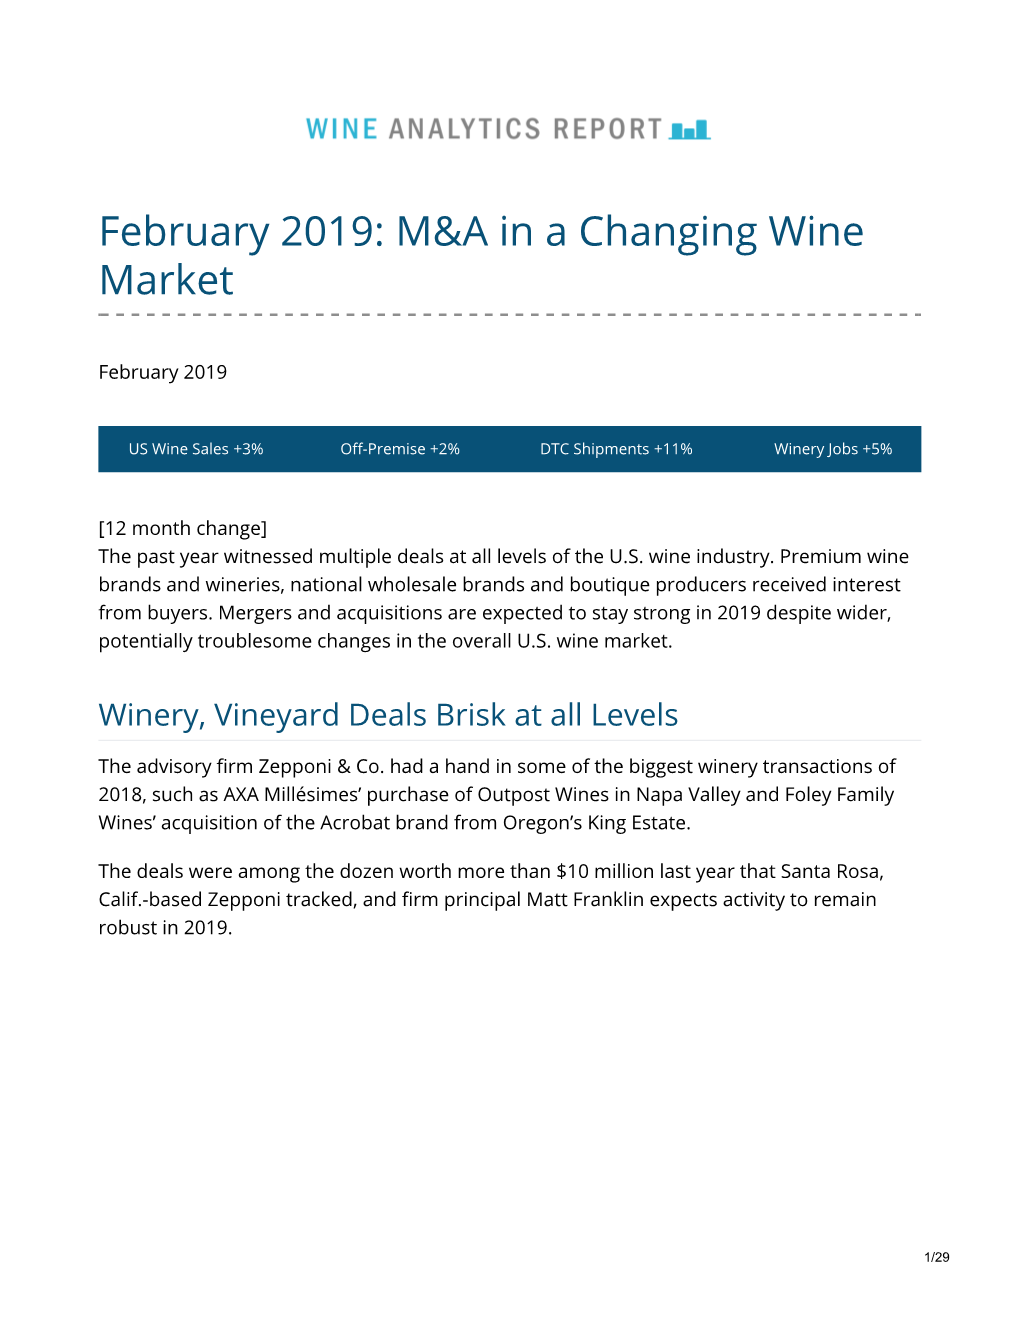 M&A in a Changing Wine Market